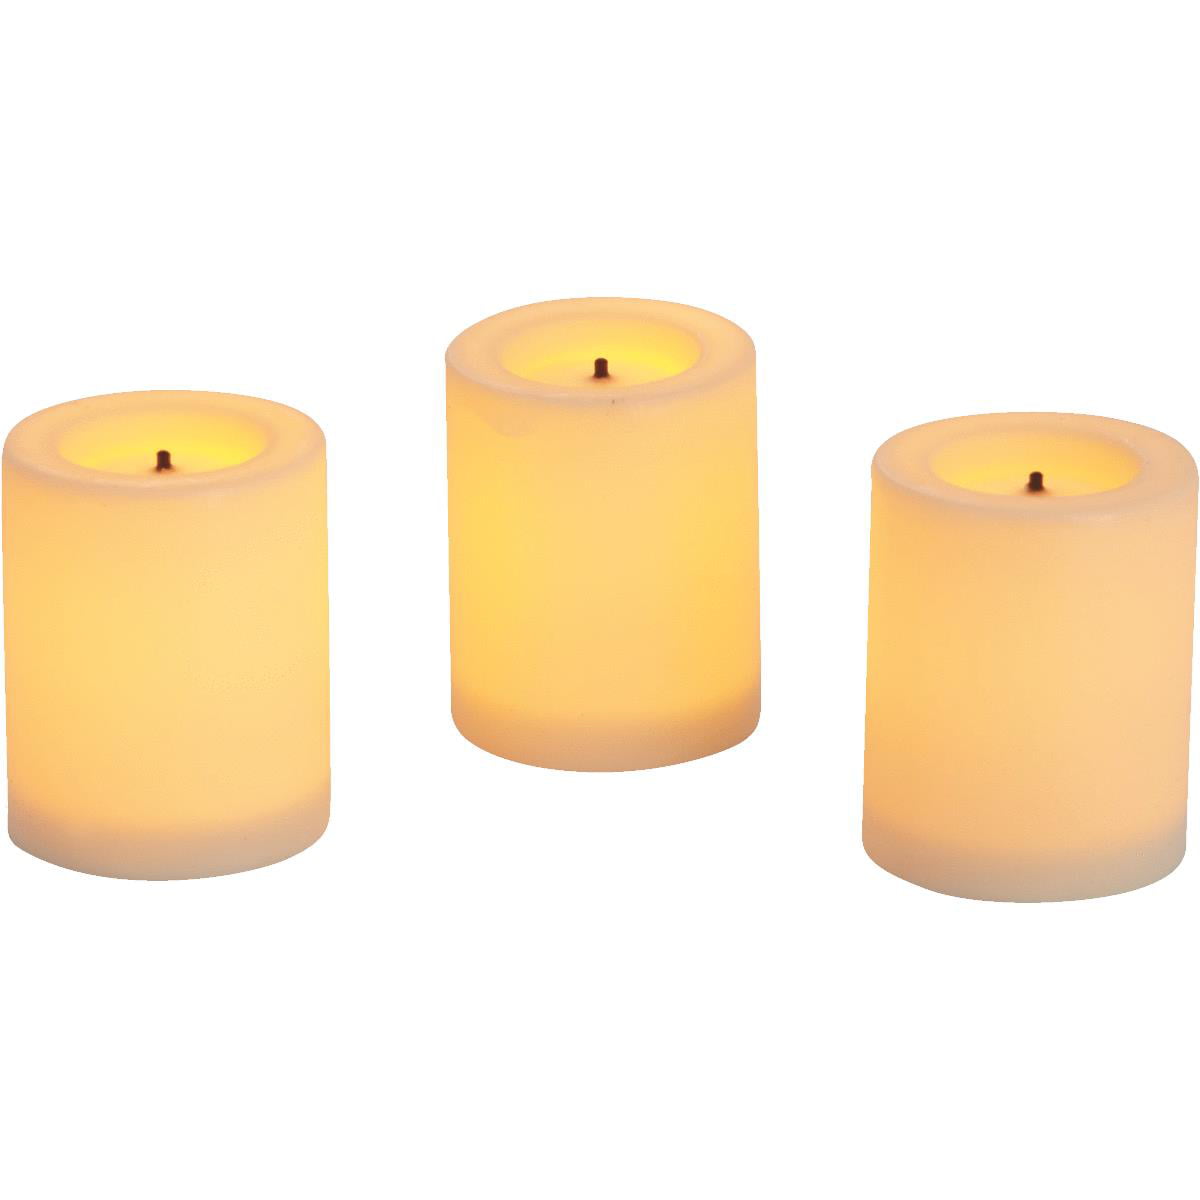 Battery Operated Flameless LED Votive Candles with Remote Timer Flickering Realistic Decorative Electric Candle Lights Set for Xmas Christmas Wedding Party Decorations Gifts 6 Pack Batteries Included Jingtech P1502R30405V-6I